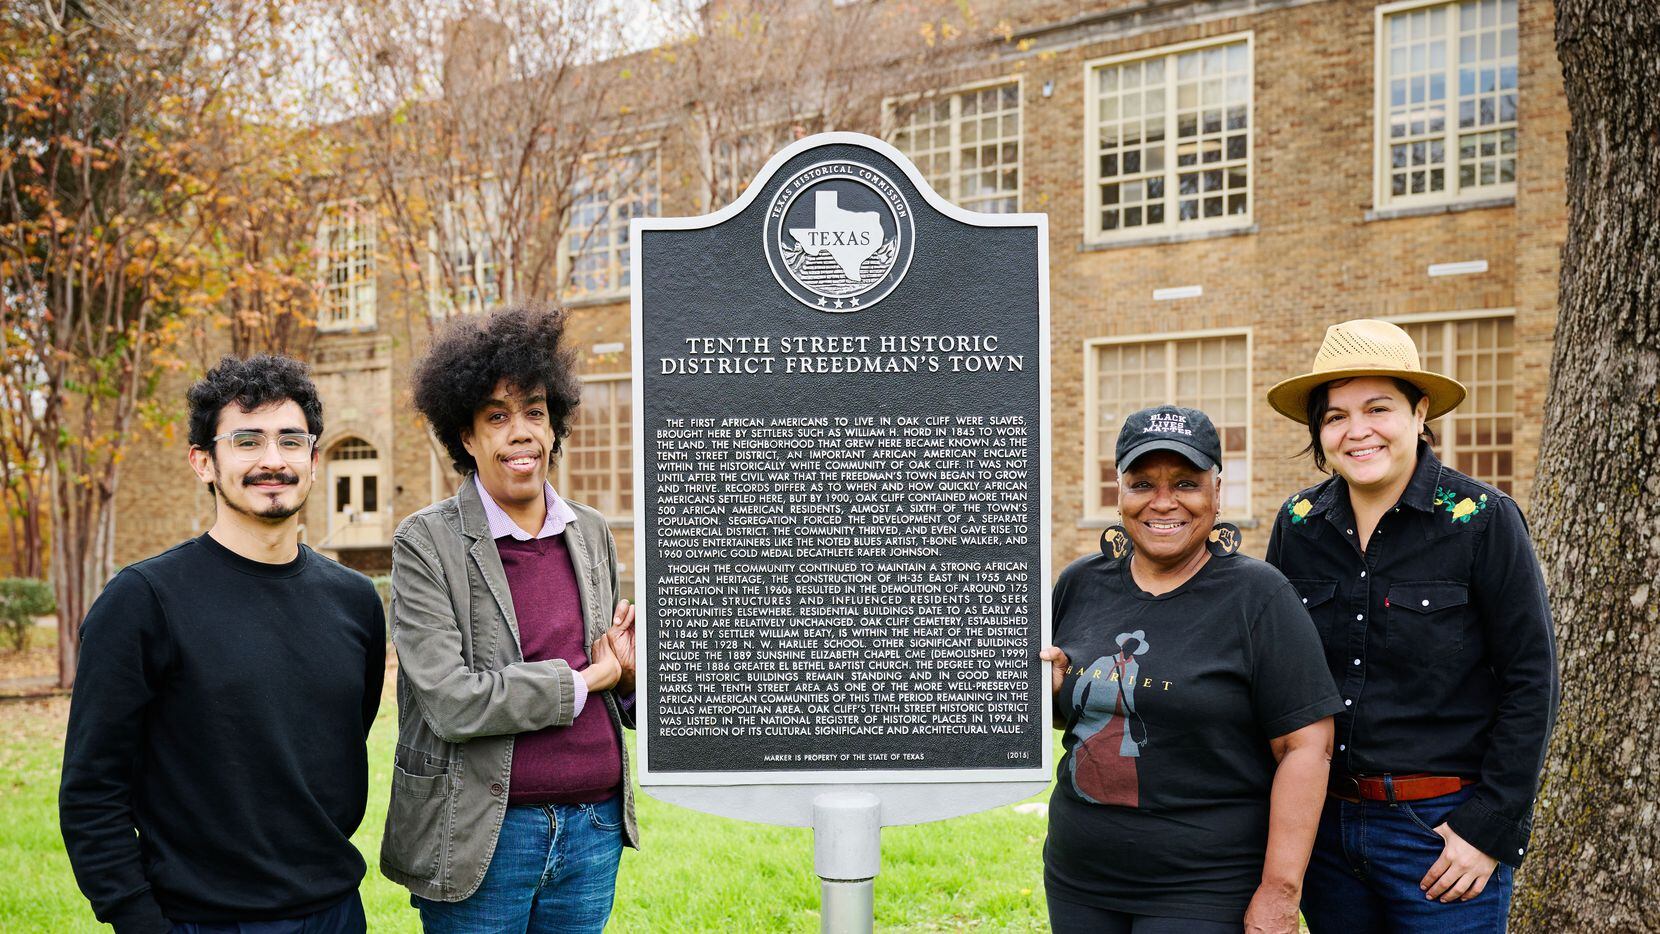 Standing alongside the historical marker for the Tenth Street Historic District freedman's...